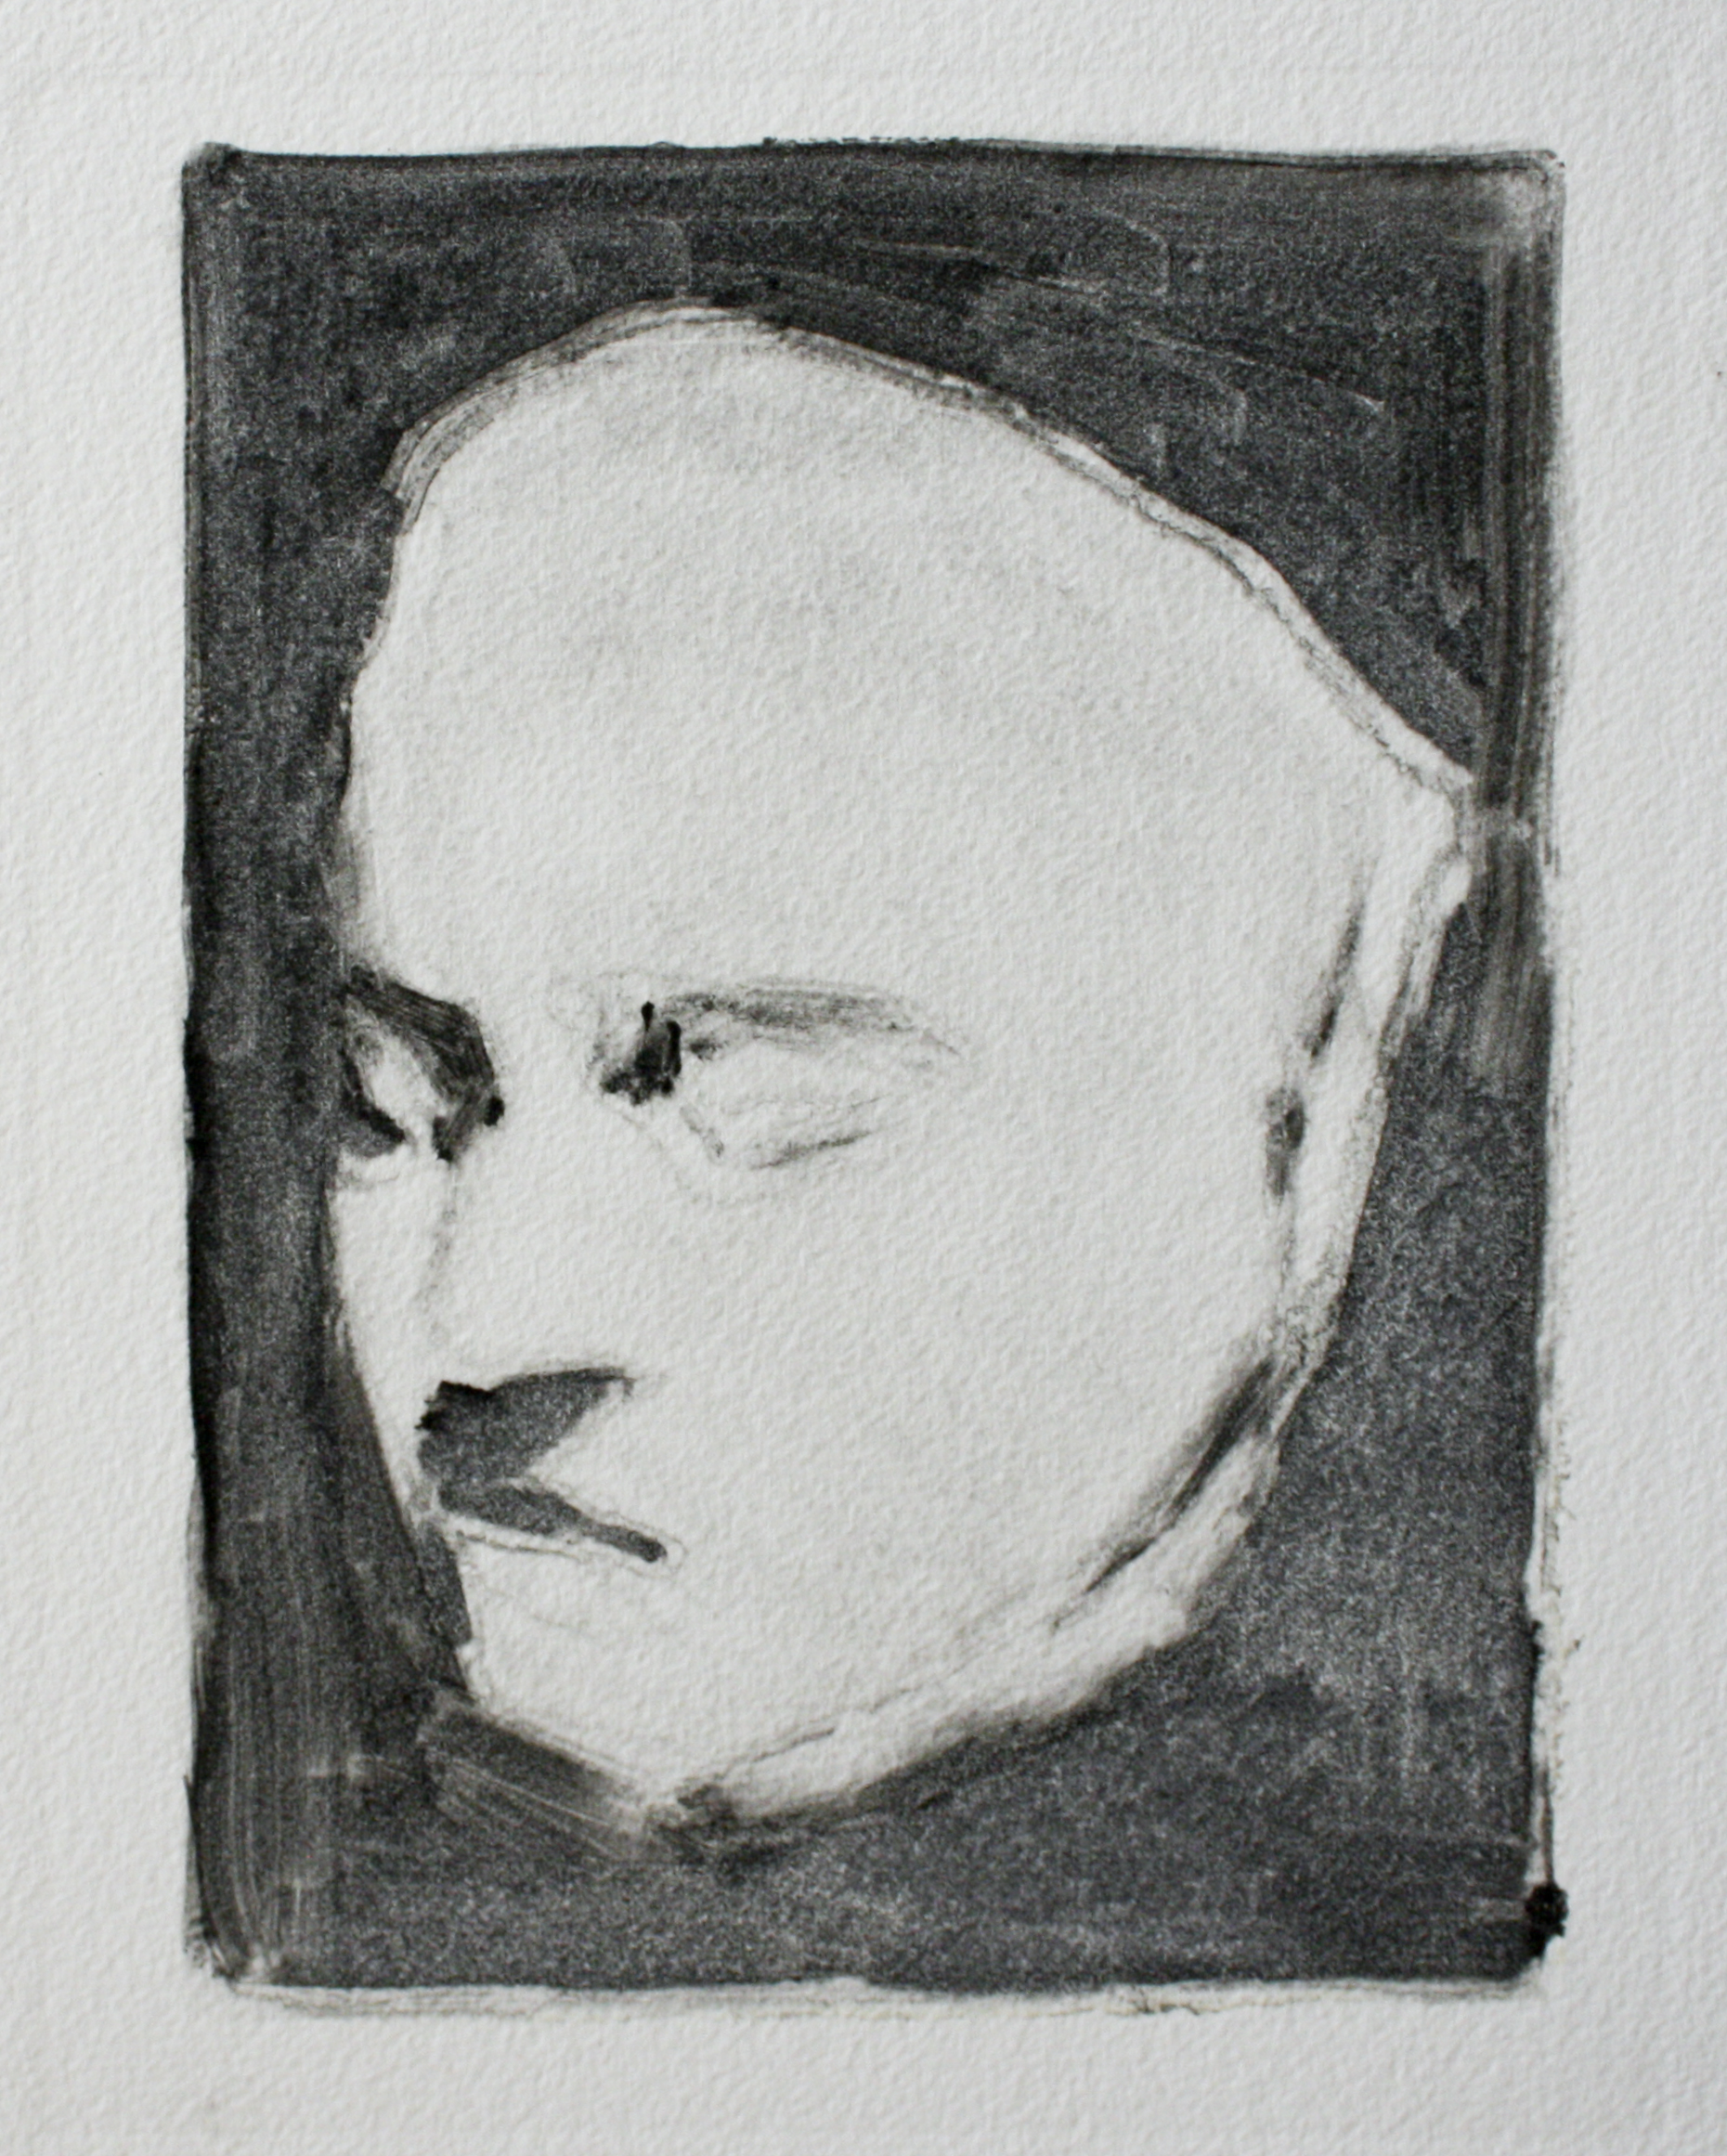   Beethoven's Death Mask   ink on paper  7.5x9.75"  2011    